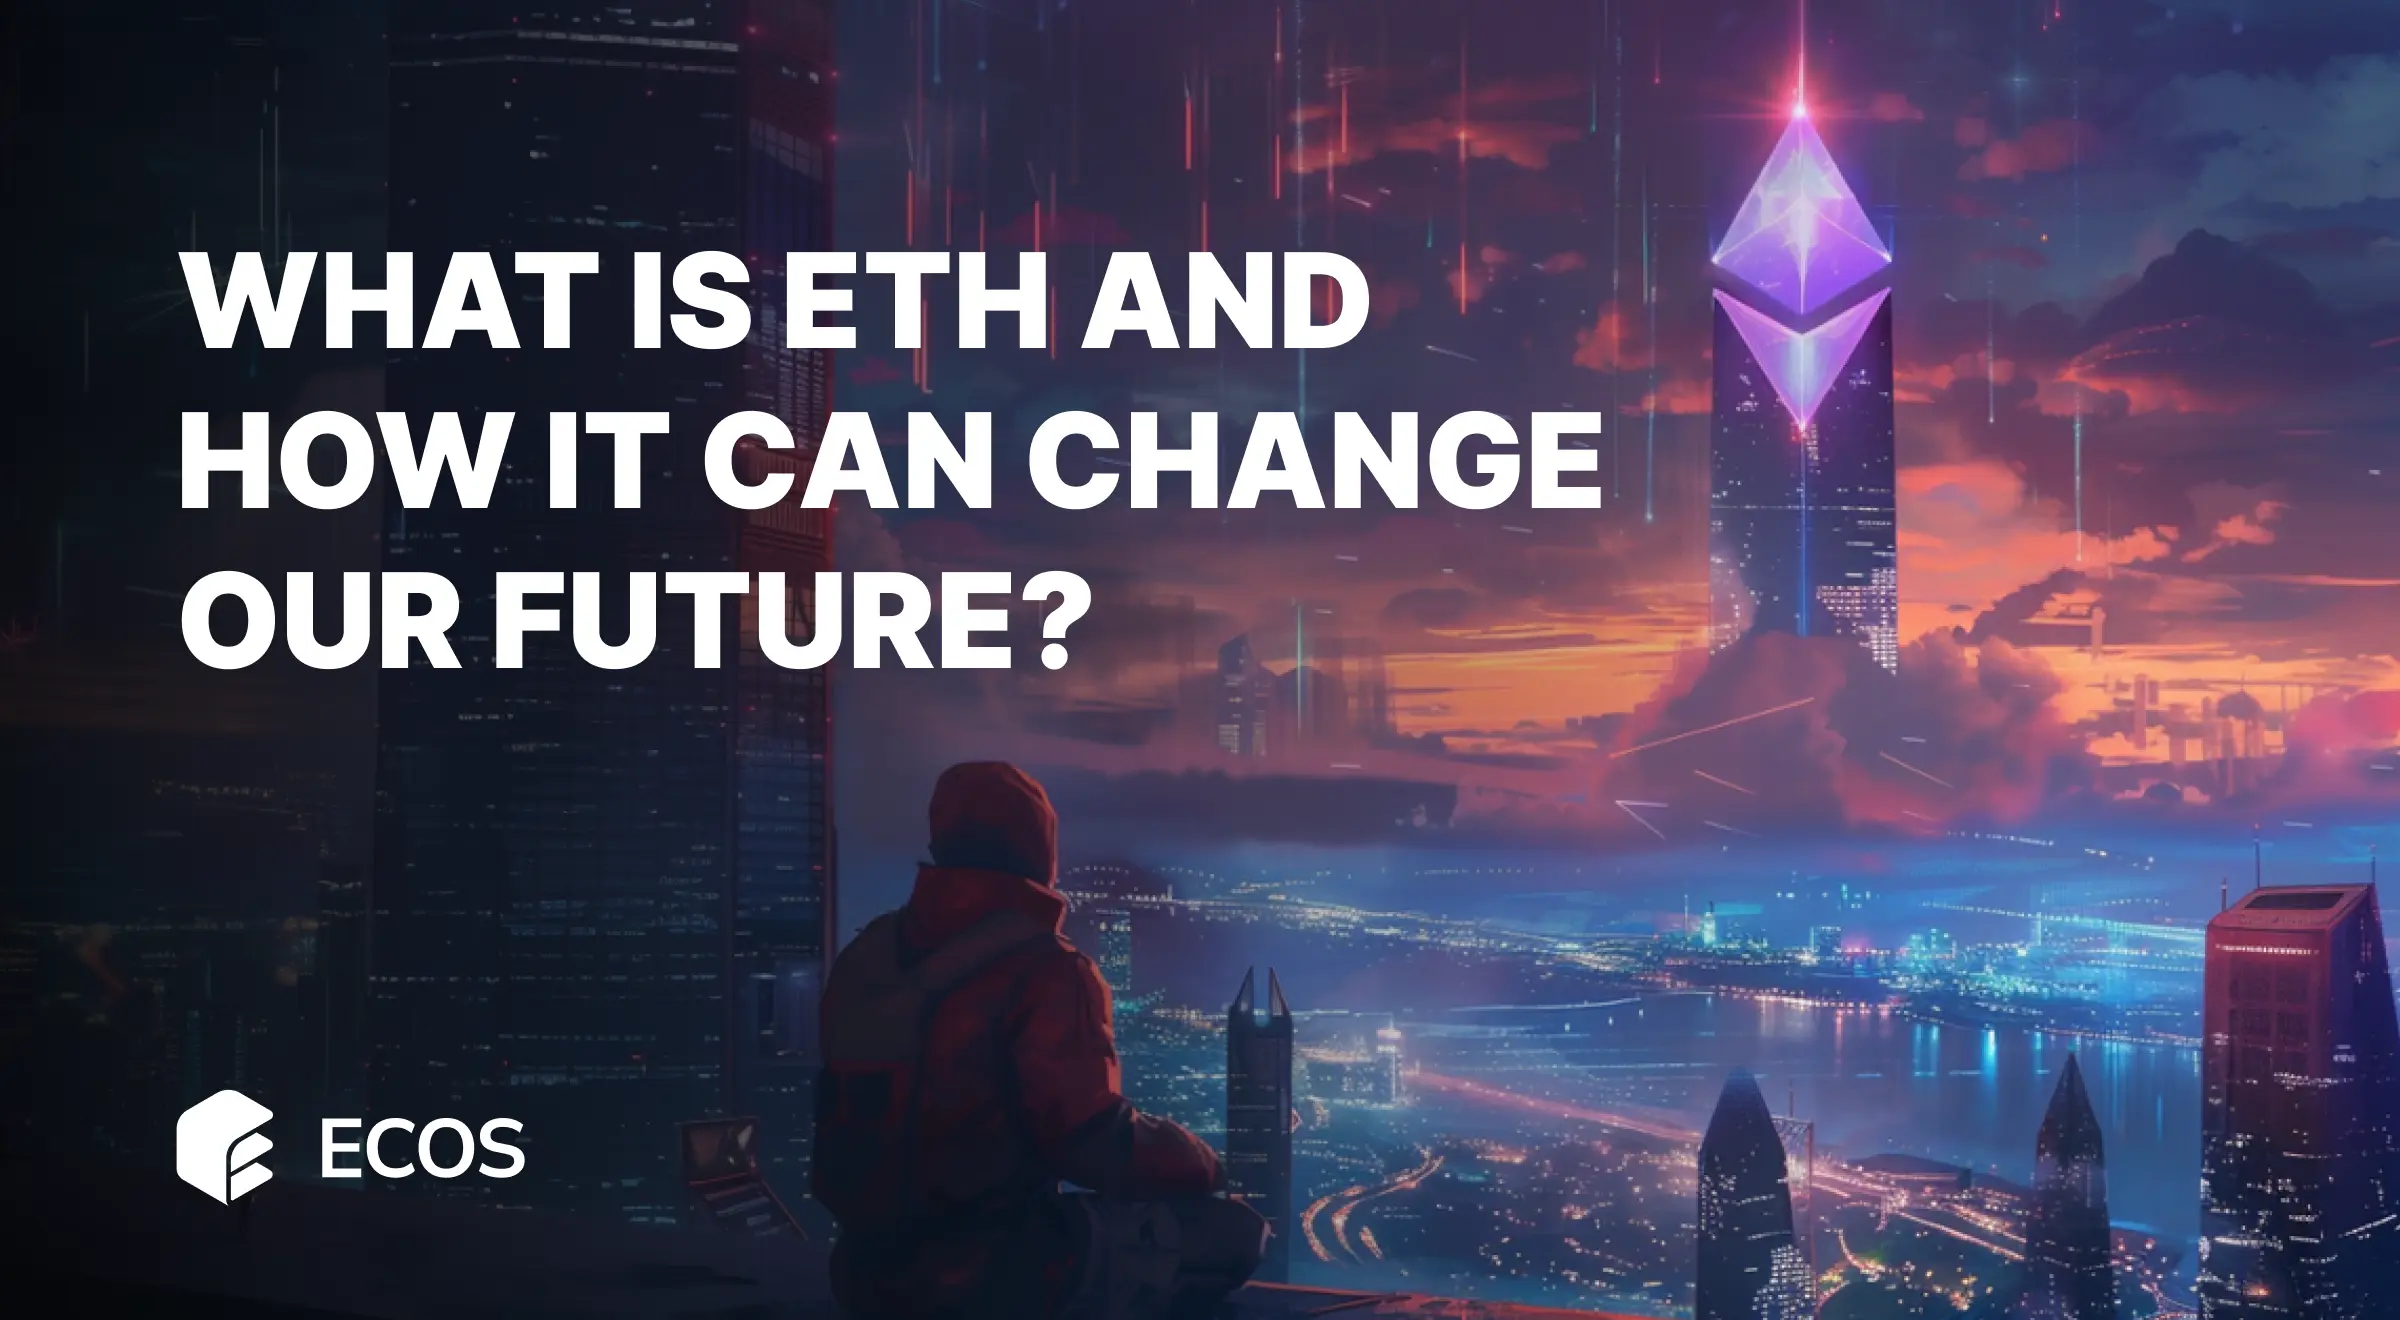 What is ethereum (eth) and how can it change our future